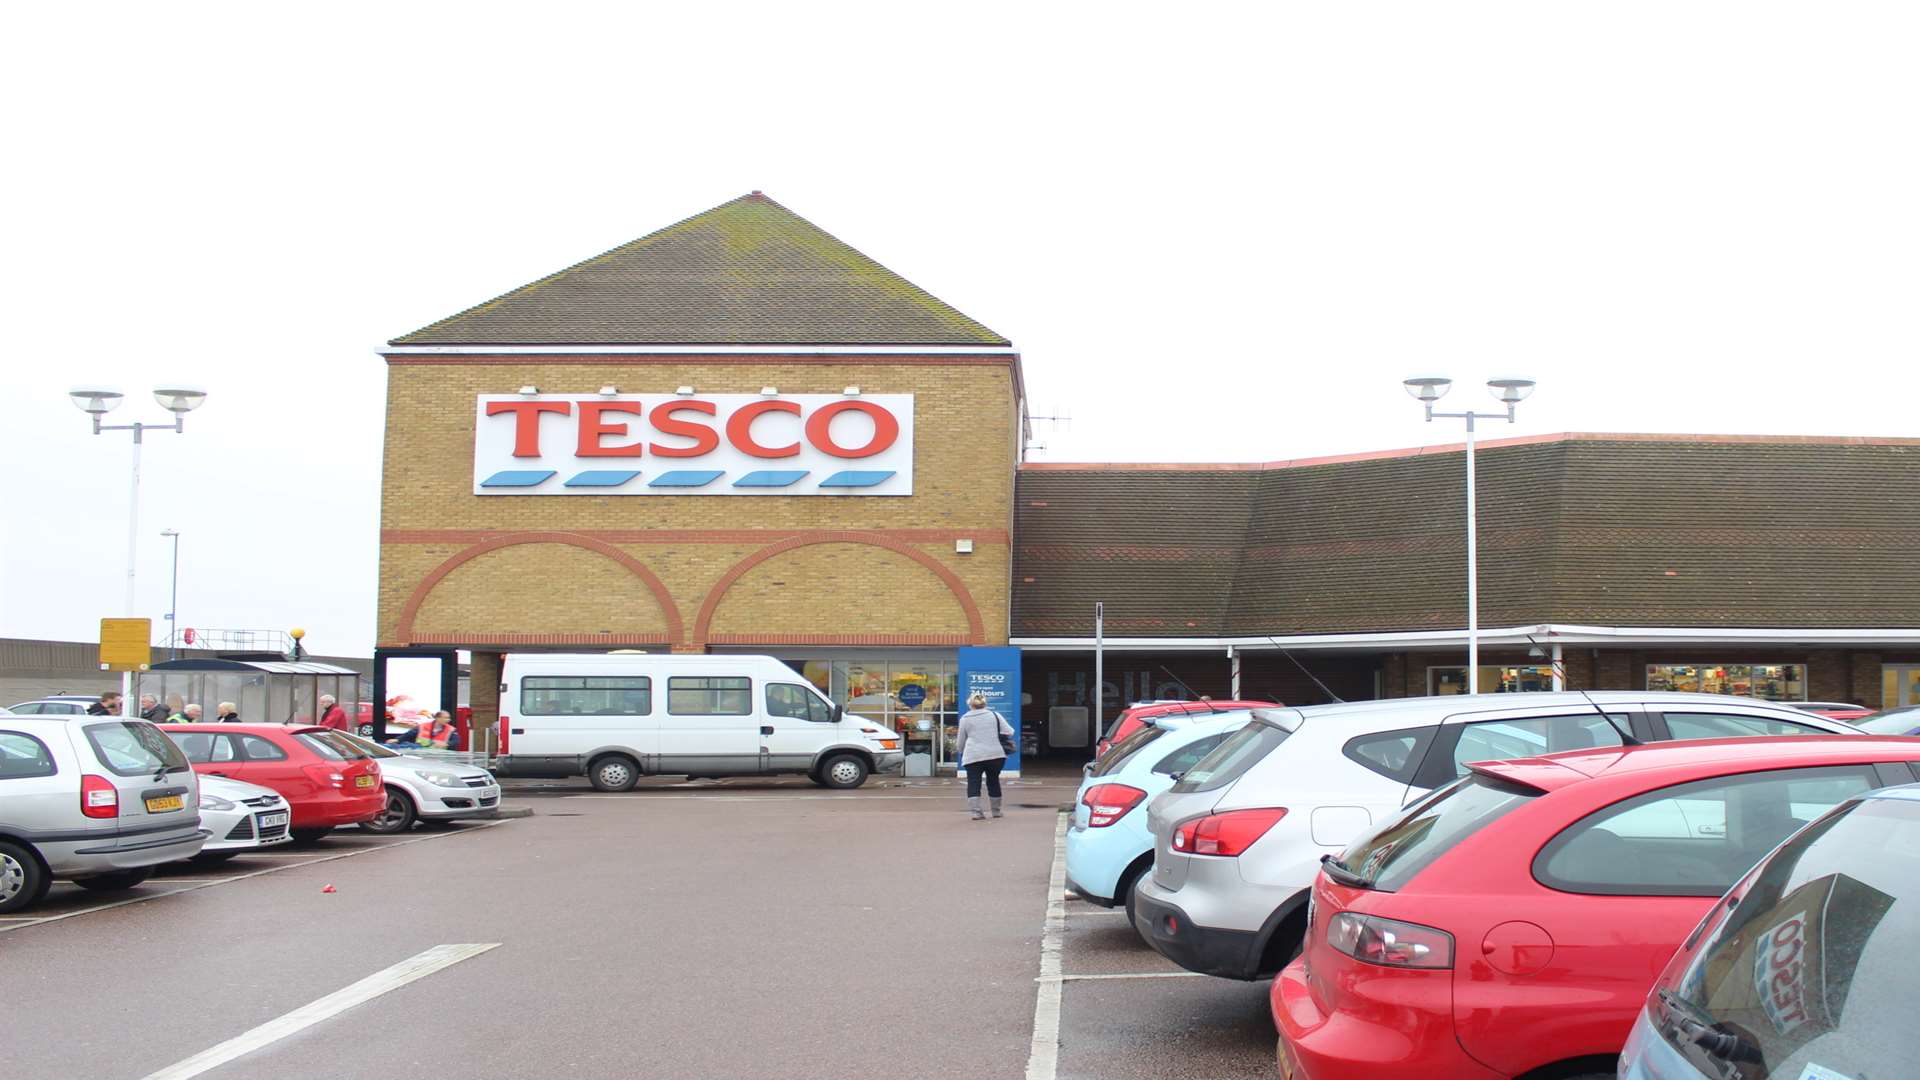 The incident happened outside Tesco in Sheerness